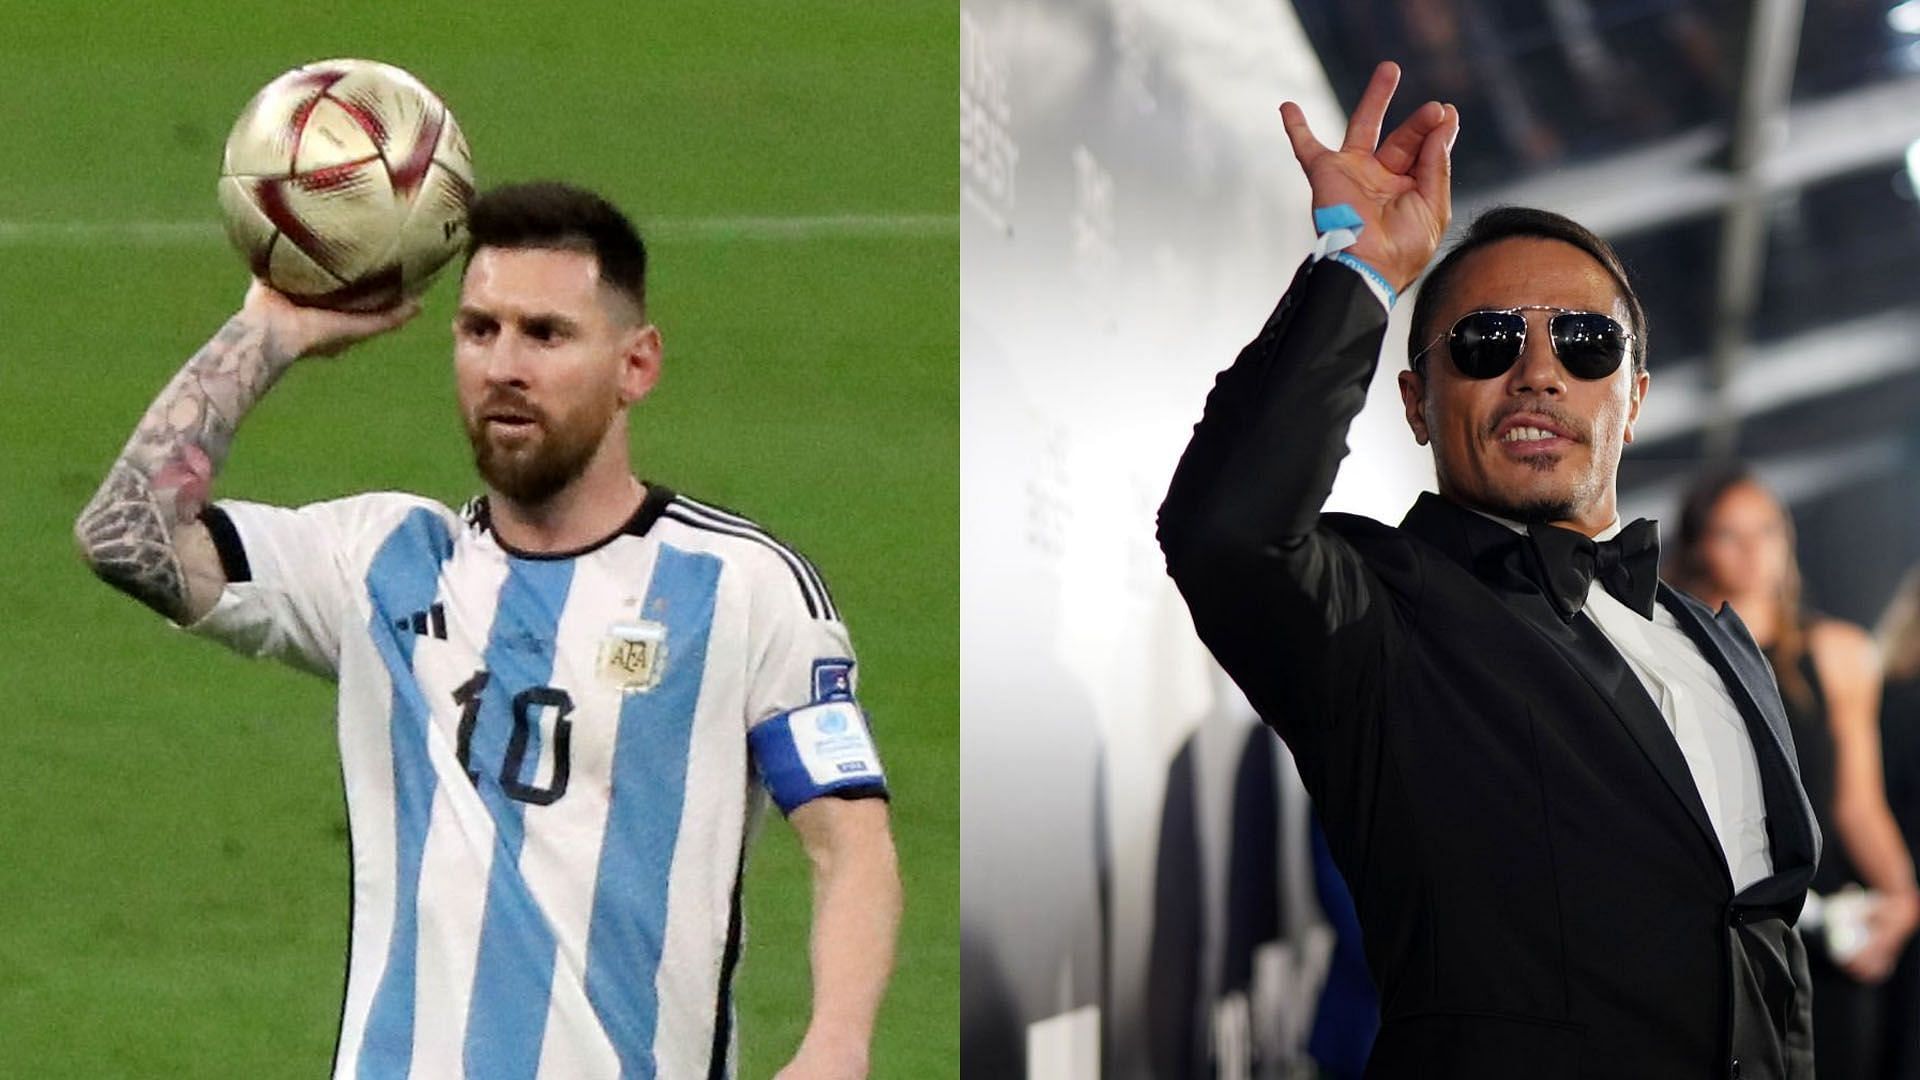 Video of Messi ignoring Salt Bae sparks humorous responses (Image via Getty Images)